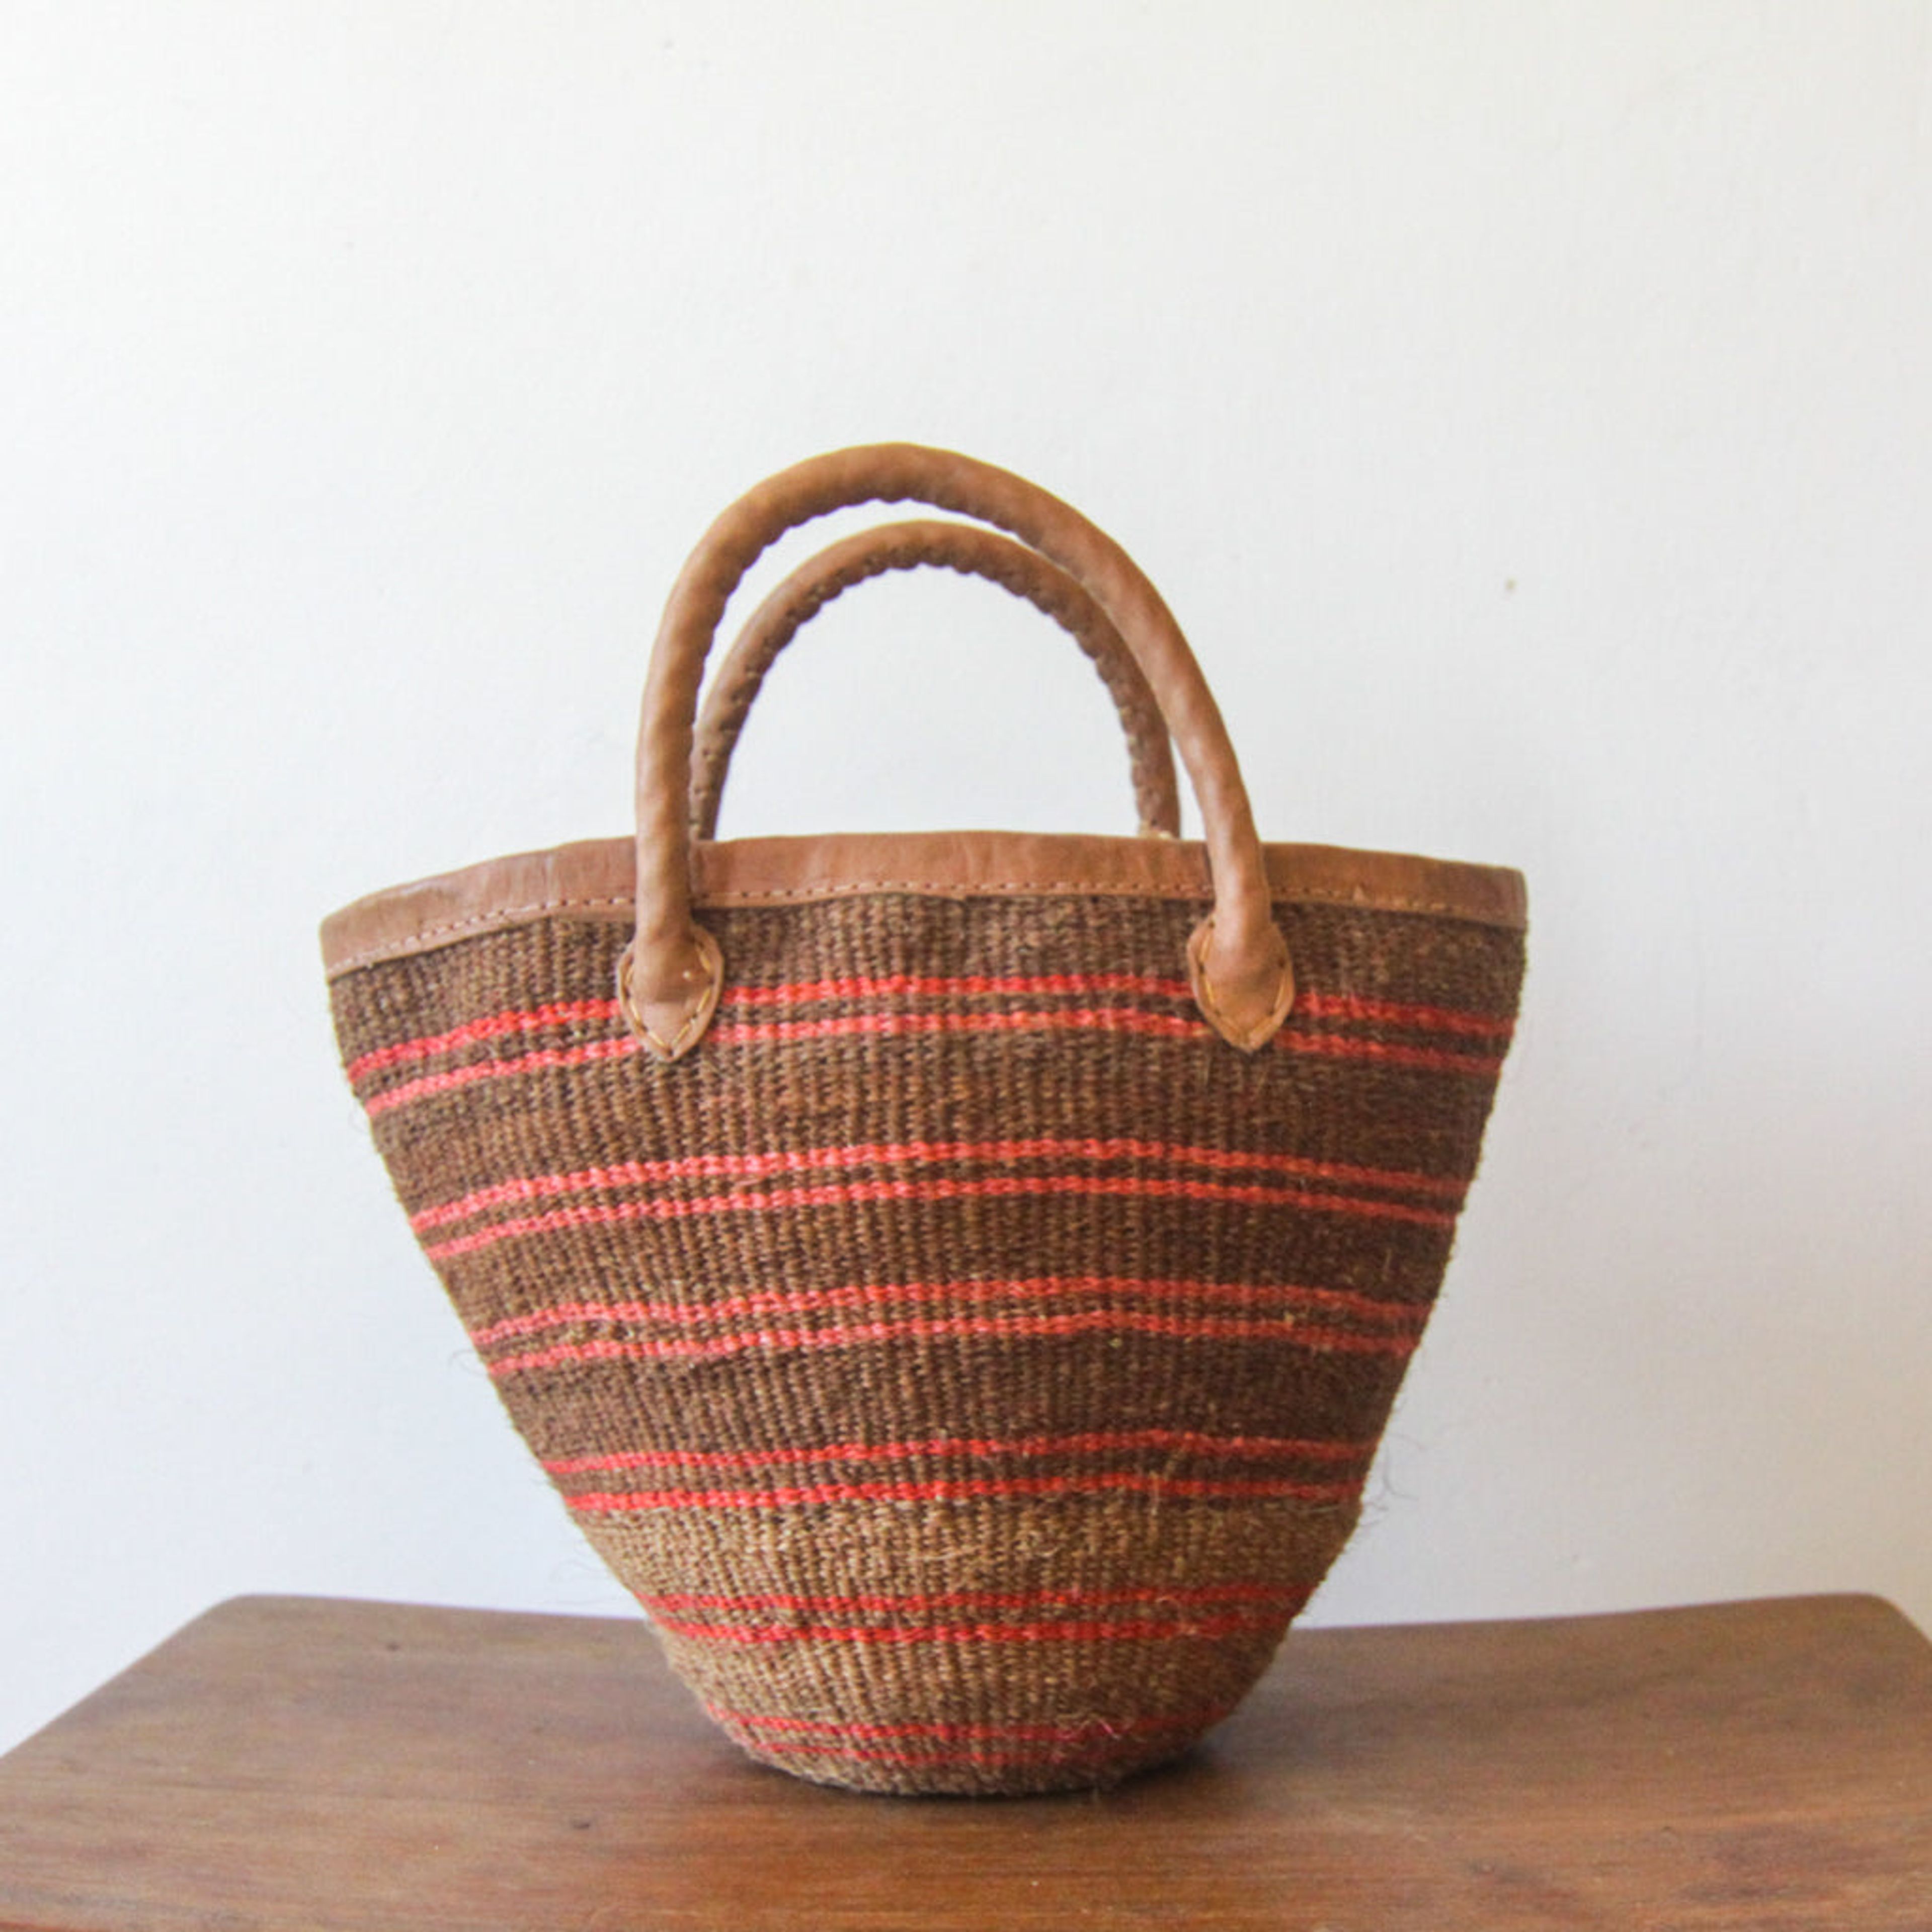 Baby darling . basket bag . leather . sisal . fineweave . one-of-a-kind . 105